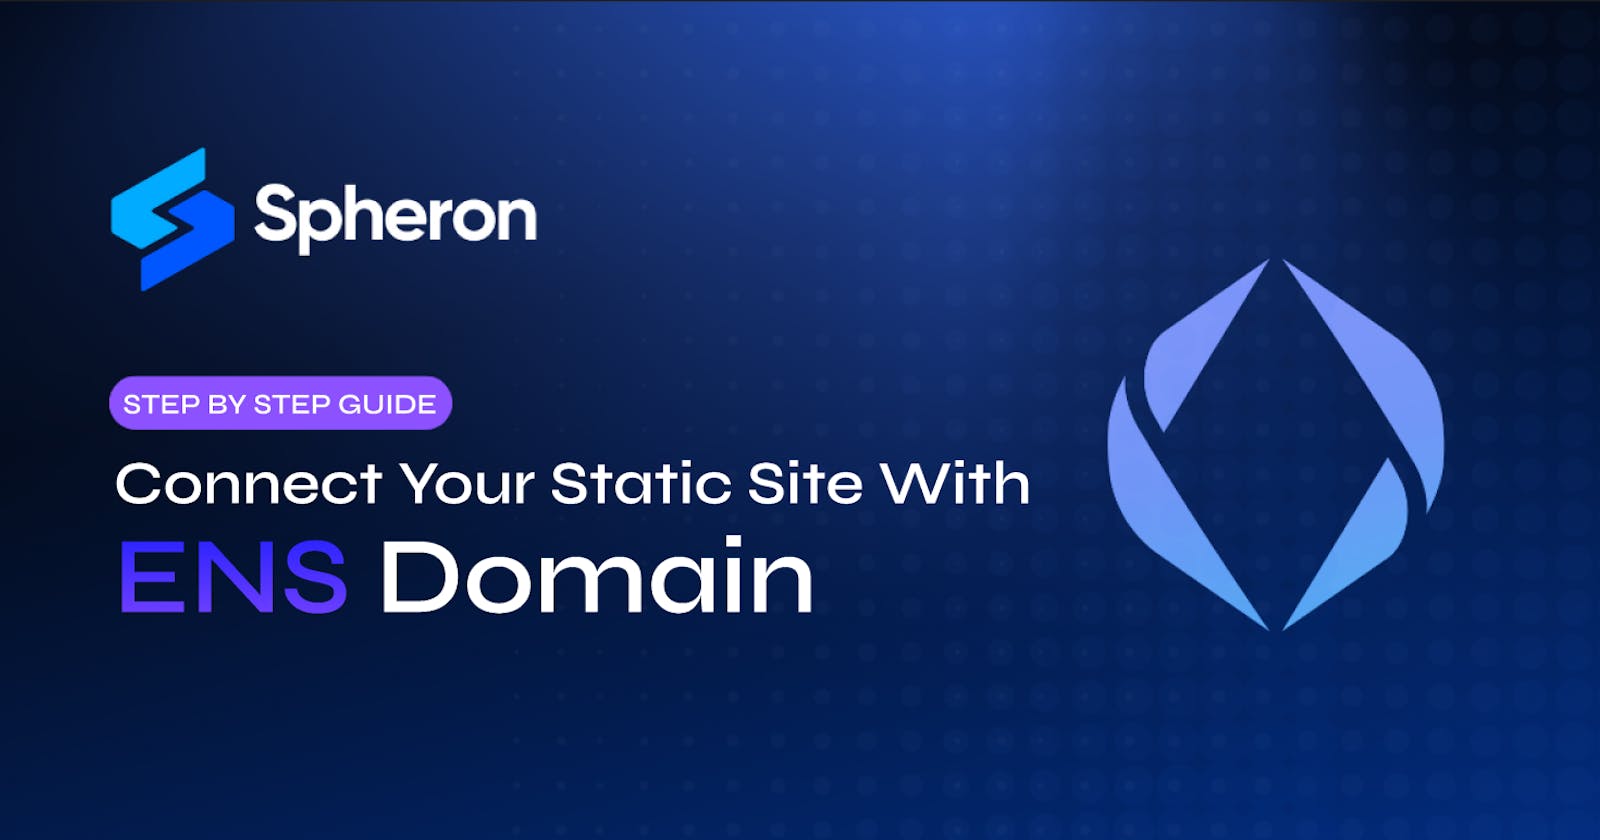 Guide to Connect Your Static Site with ENS Domain